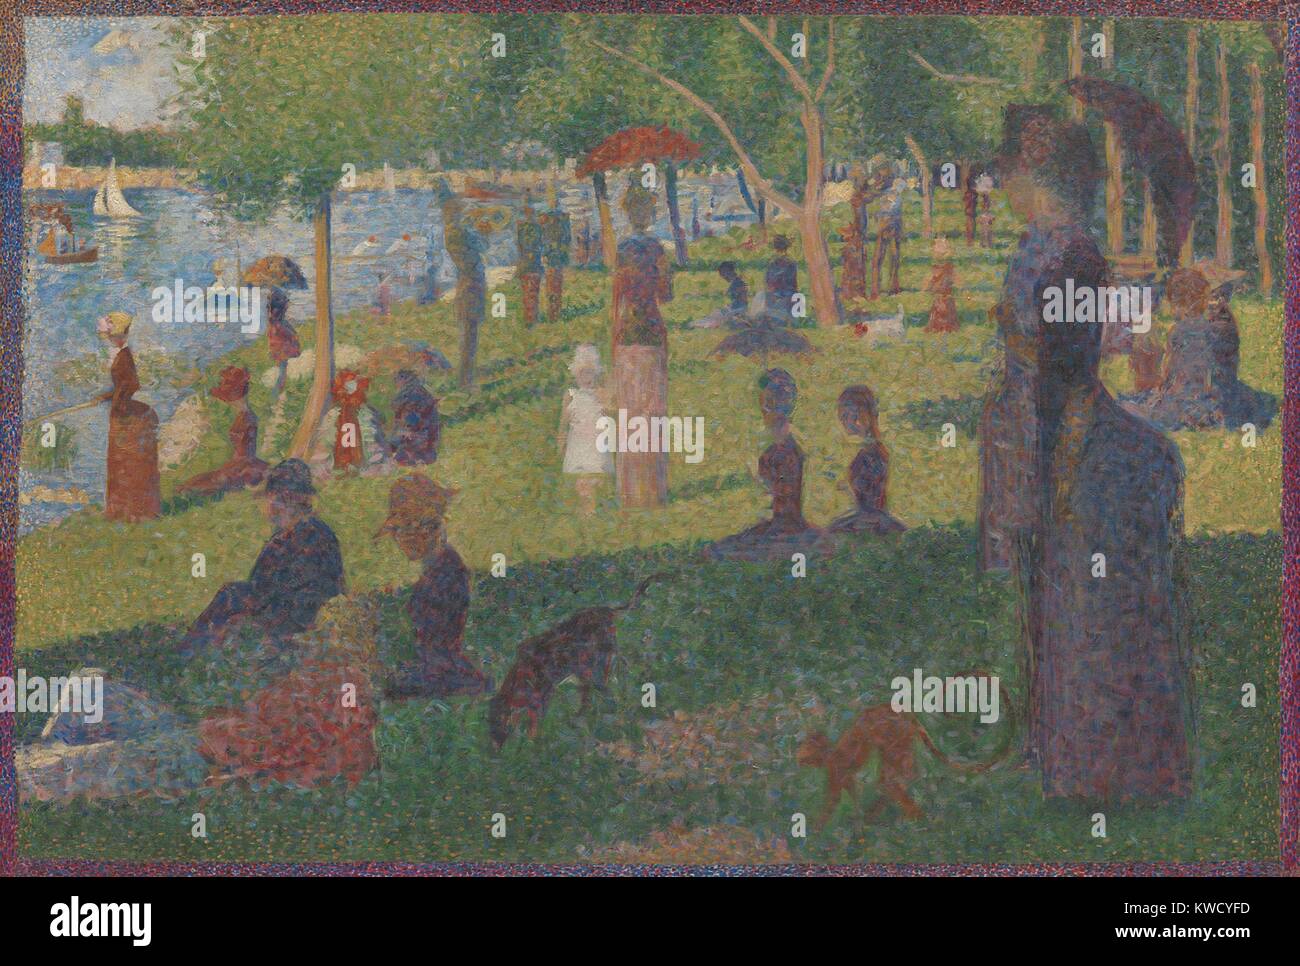 Study for A Sunday on La Grande Jatte, by Georges Seurat, 1884, French Post-Impressionist painting. This oil on canvas work was Seurat’s final study for his most famous painting. It measures 28 by 31 inches, with surfaces and forms rendered in uniformly (BSLOC 2017 5 81) Stock Photo